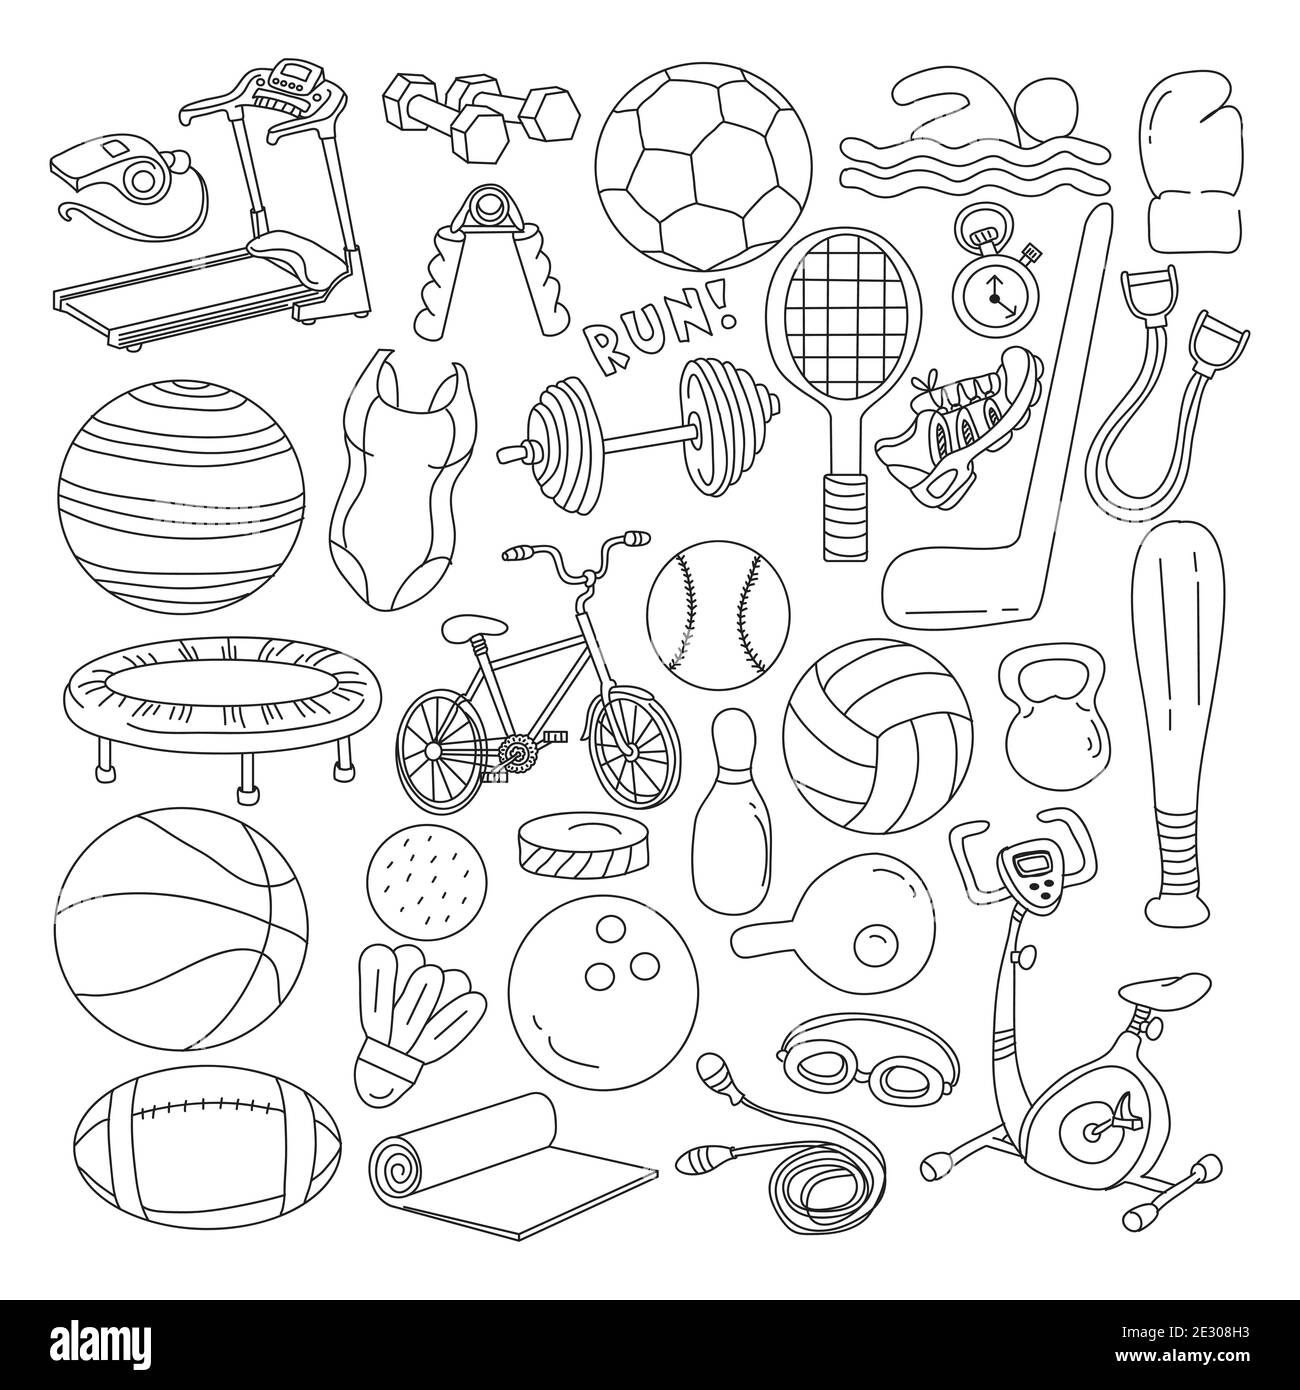 Fitness doodles set. Sport equipment, exercise machines and training accessories Stock Vector